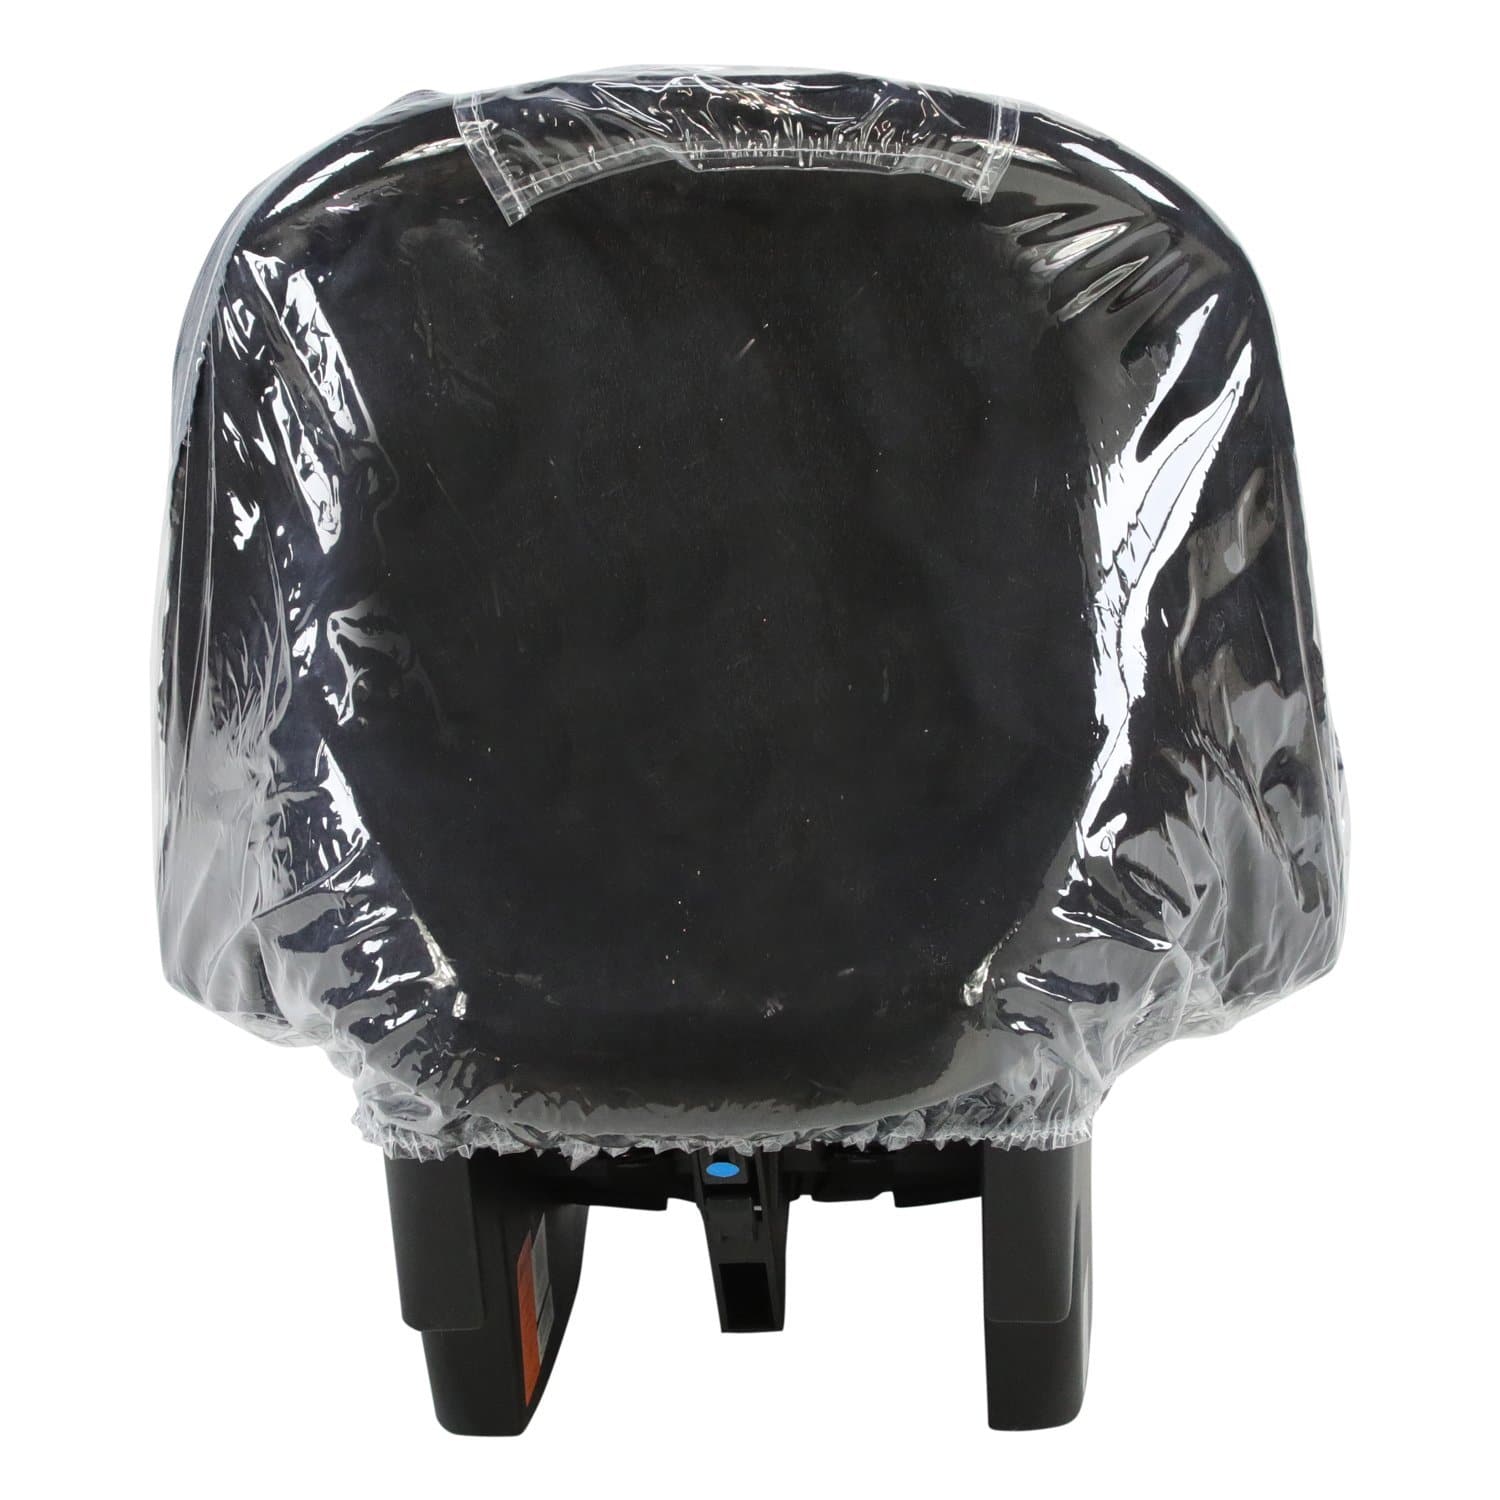 Car Seat Raincover Compatible with Koochi - For Your Little One